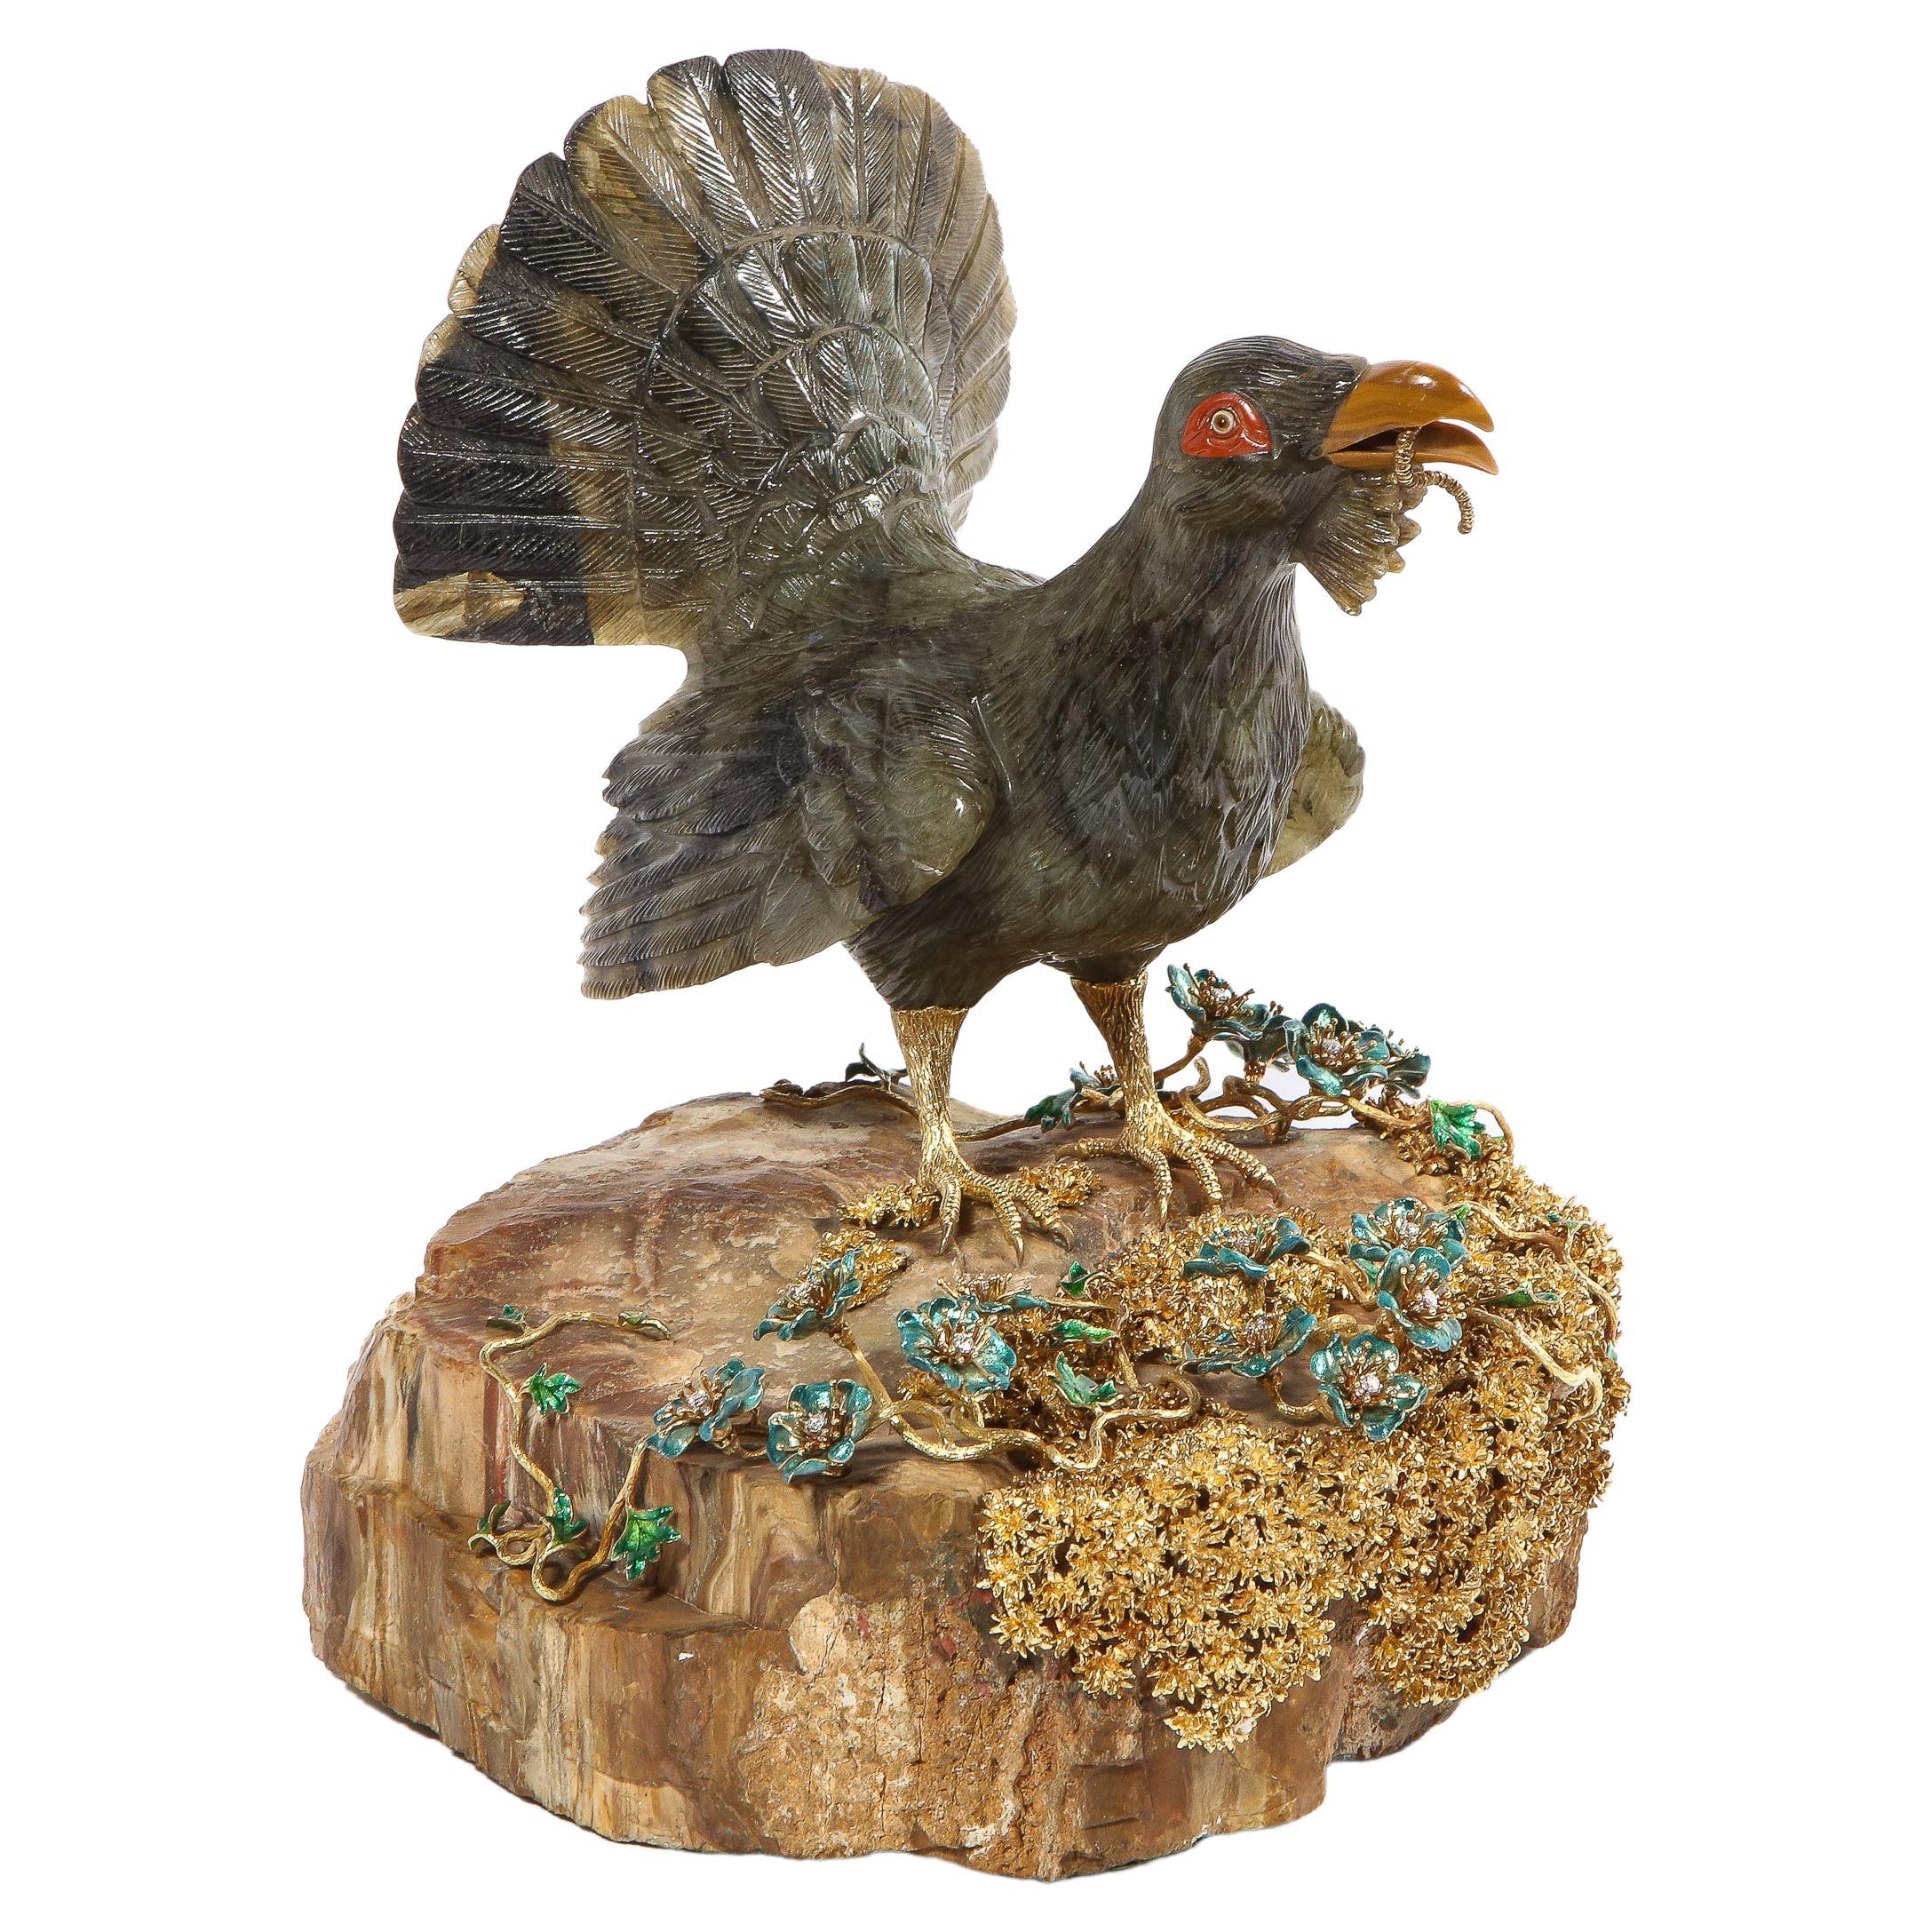 A rare 18K gold, enamel and diamond mounted carved labradorite turkey bird sculpture on a petrified wood base, attributed to Manfred Wild, Idar-Oberstein, Germany.

Very finely crafted of the highest quality and best color Madagascar labradorite